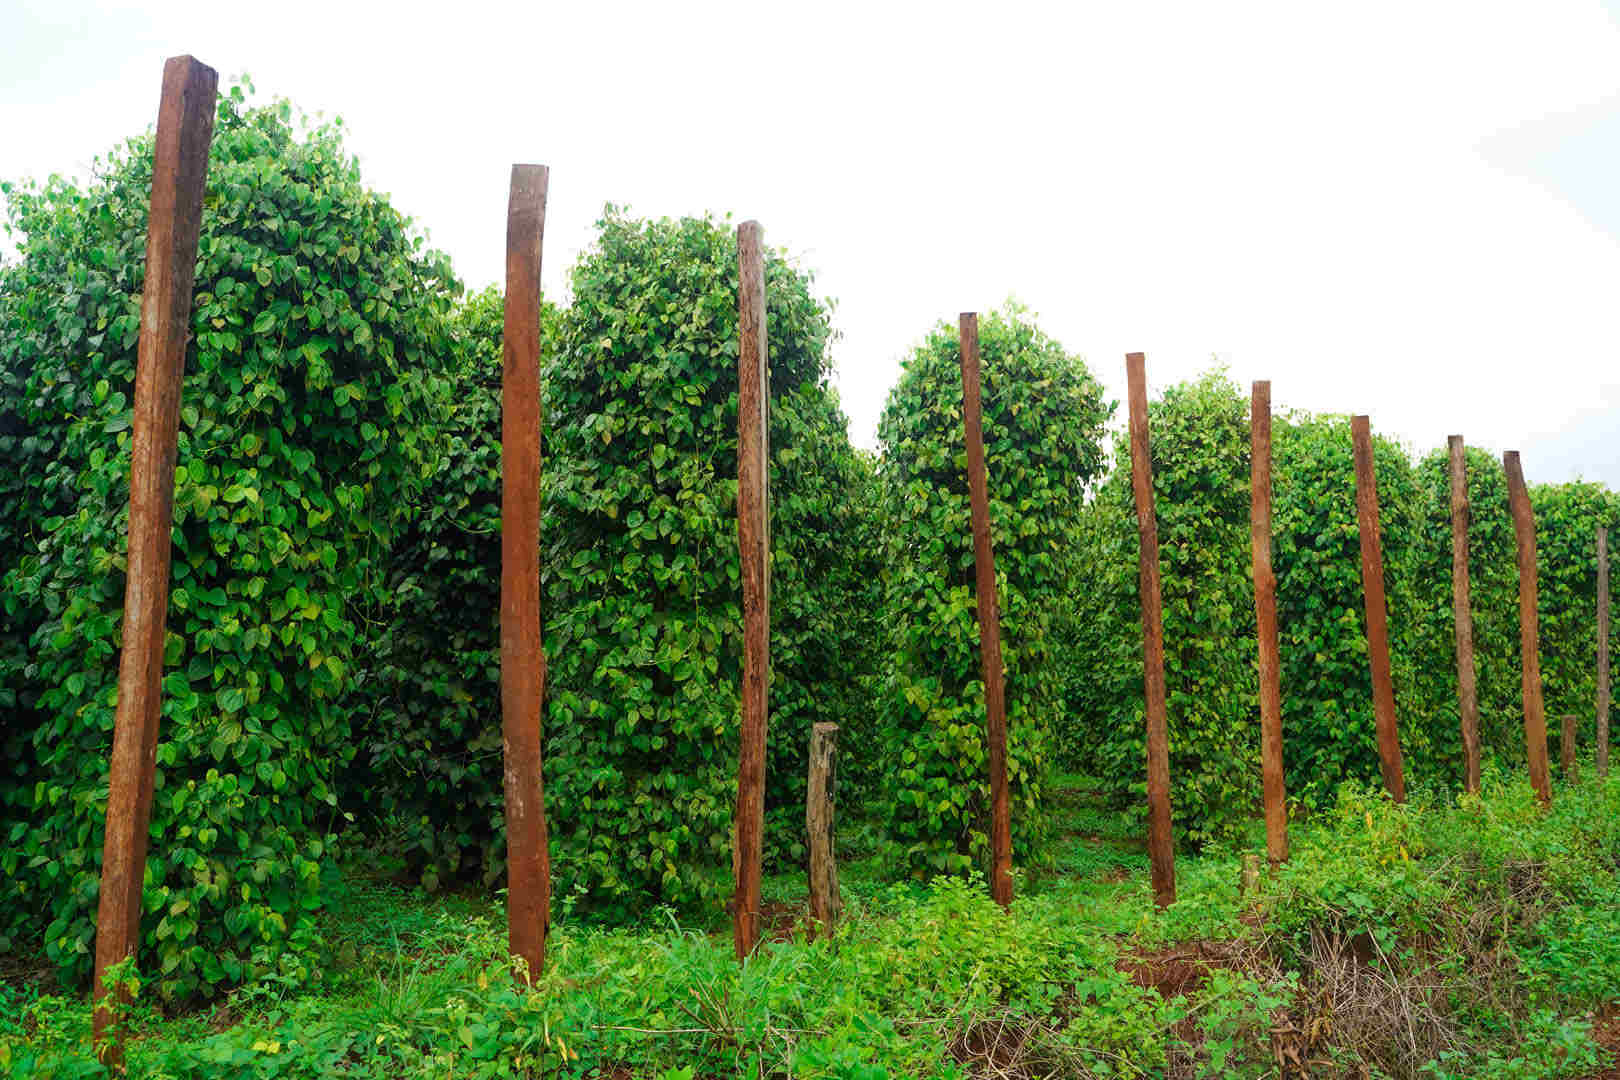 Pepper vine must climb on tall pillars over 4 meters to gain more space and sunlight